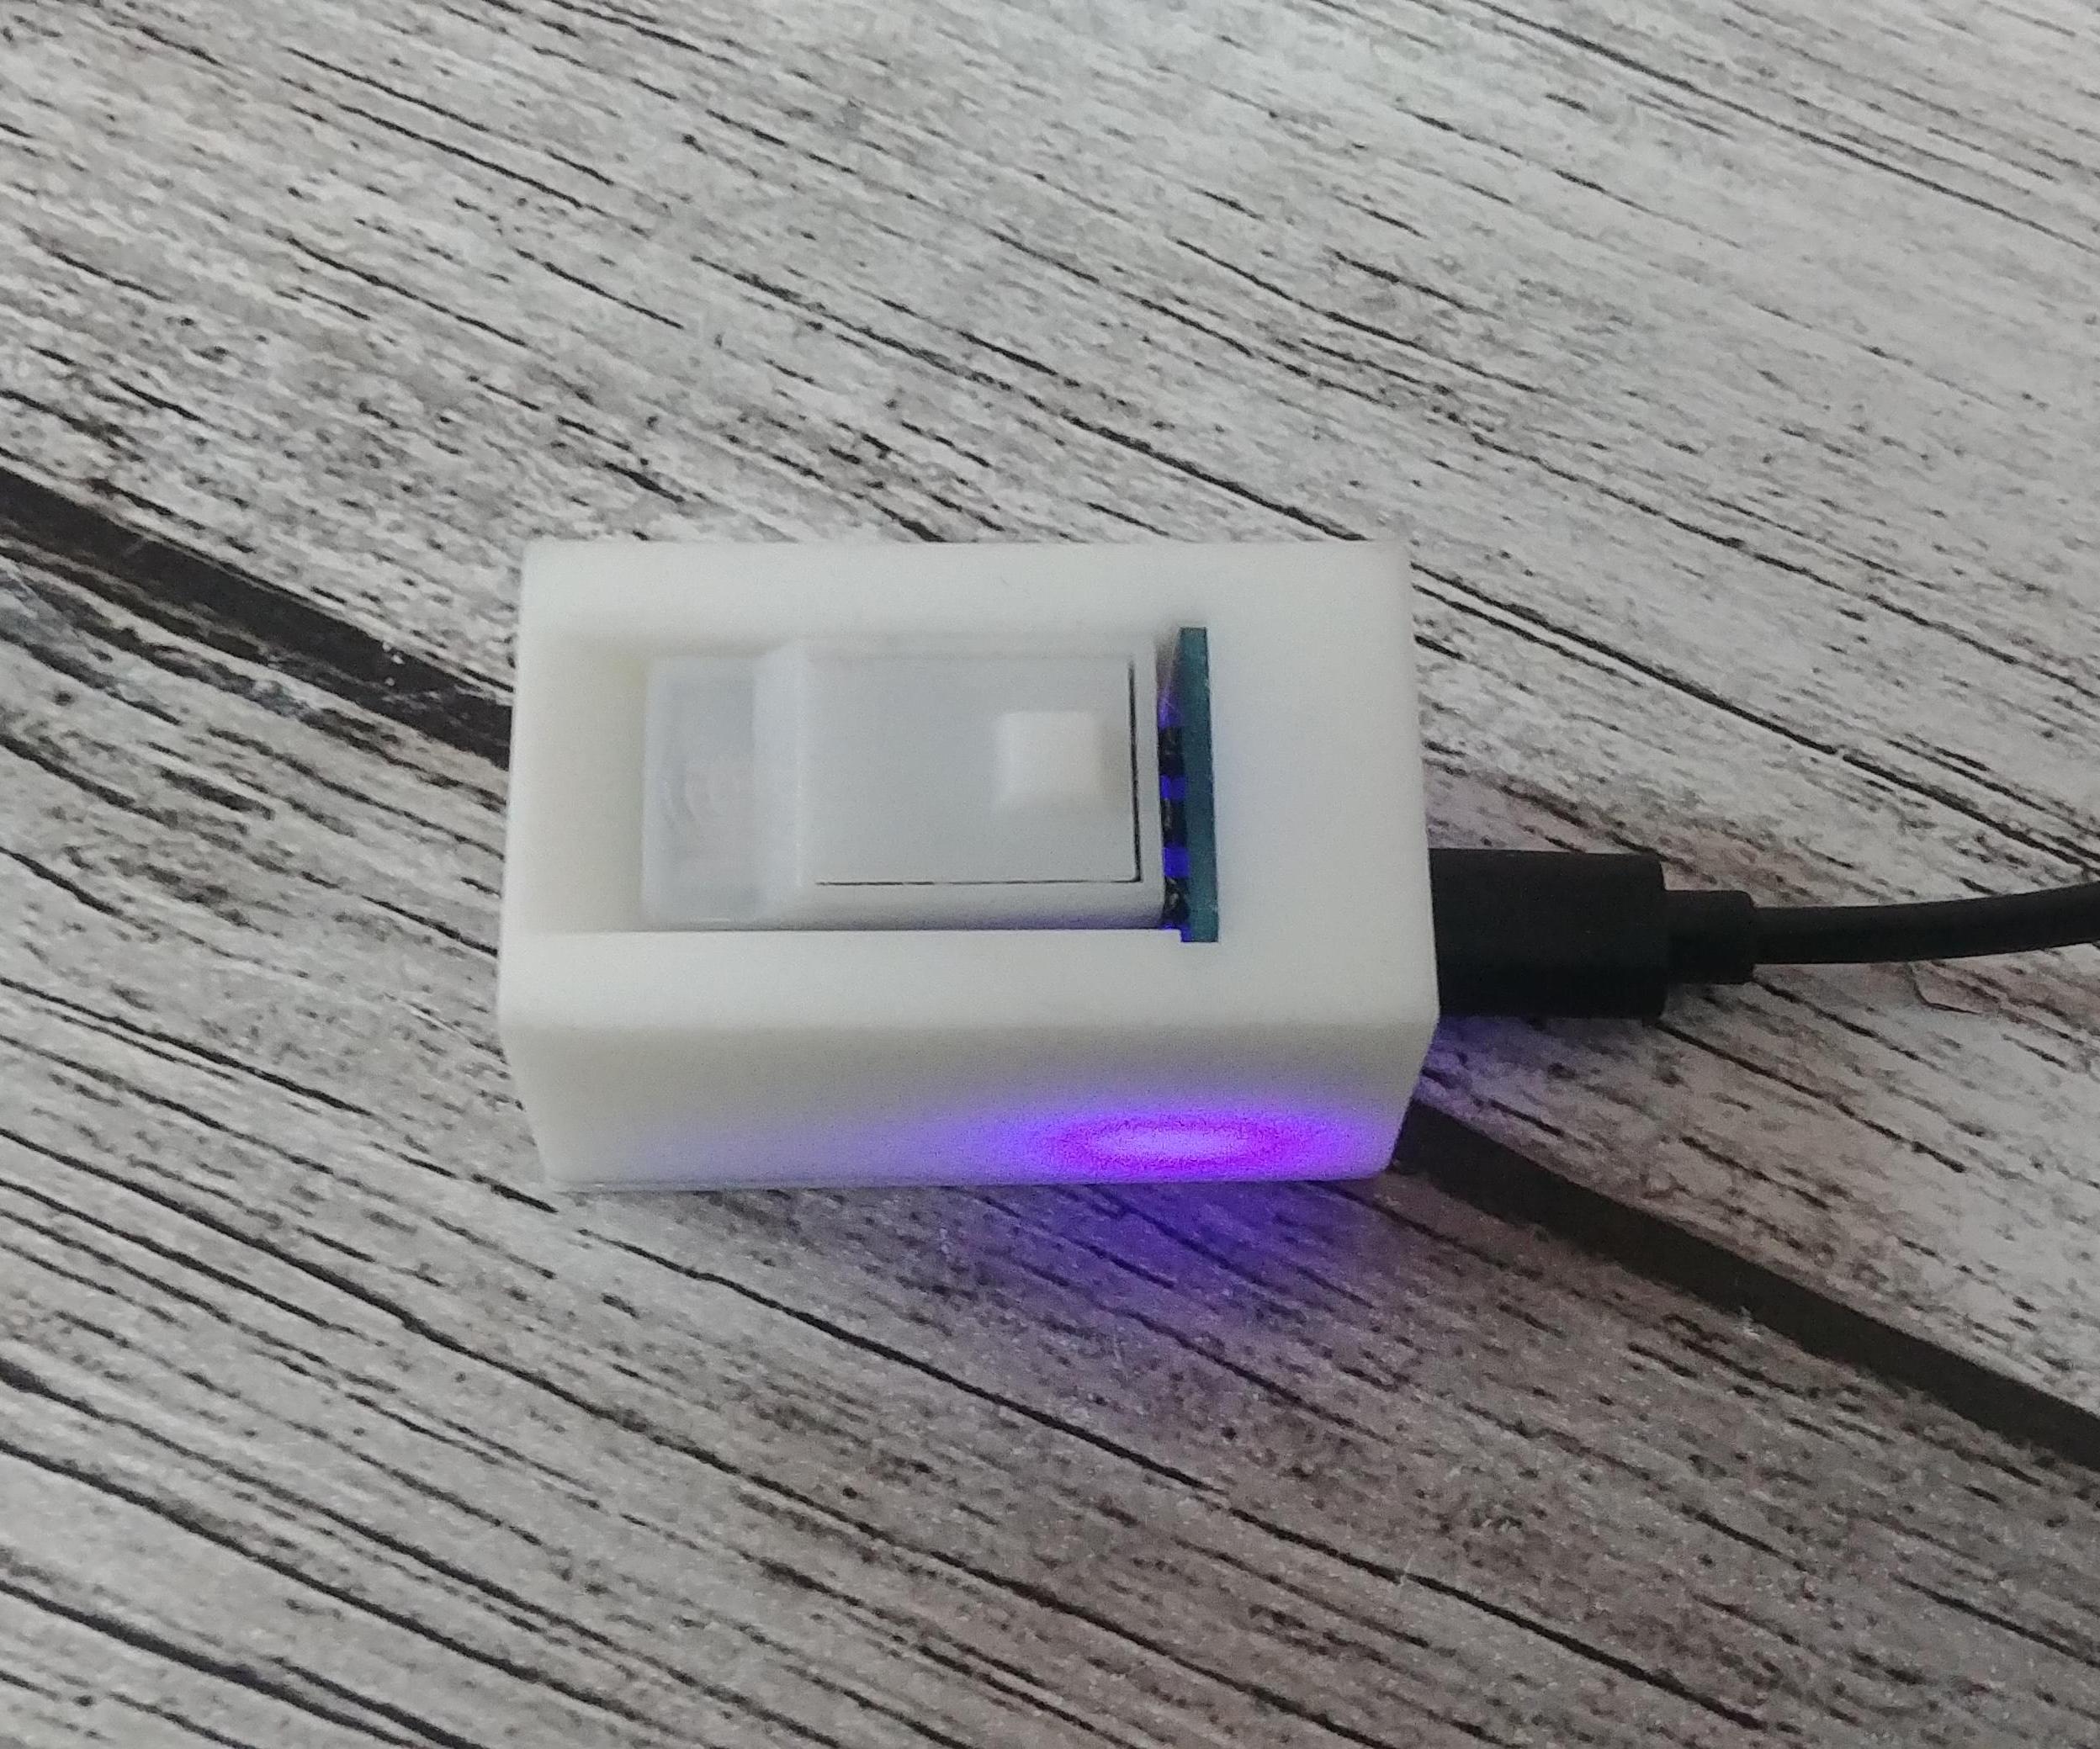 Diy Re-Configurable Wifi Button With Charging Base V2